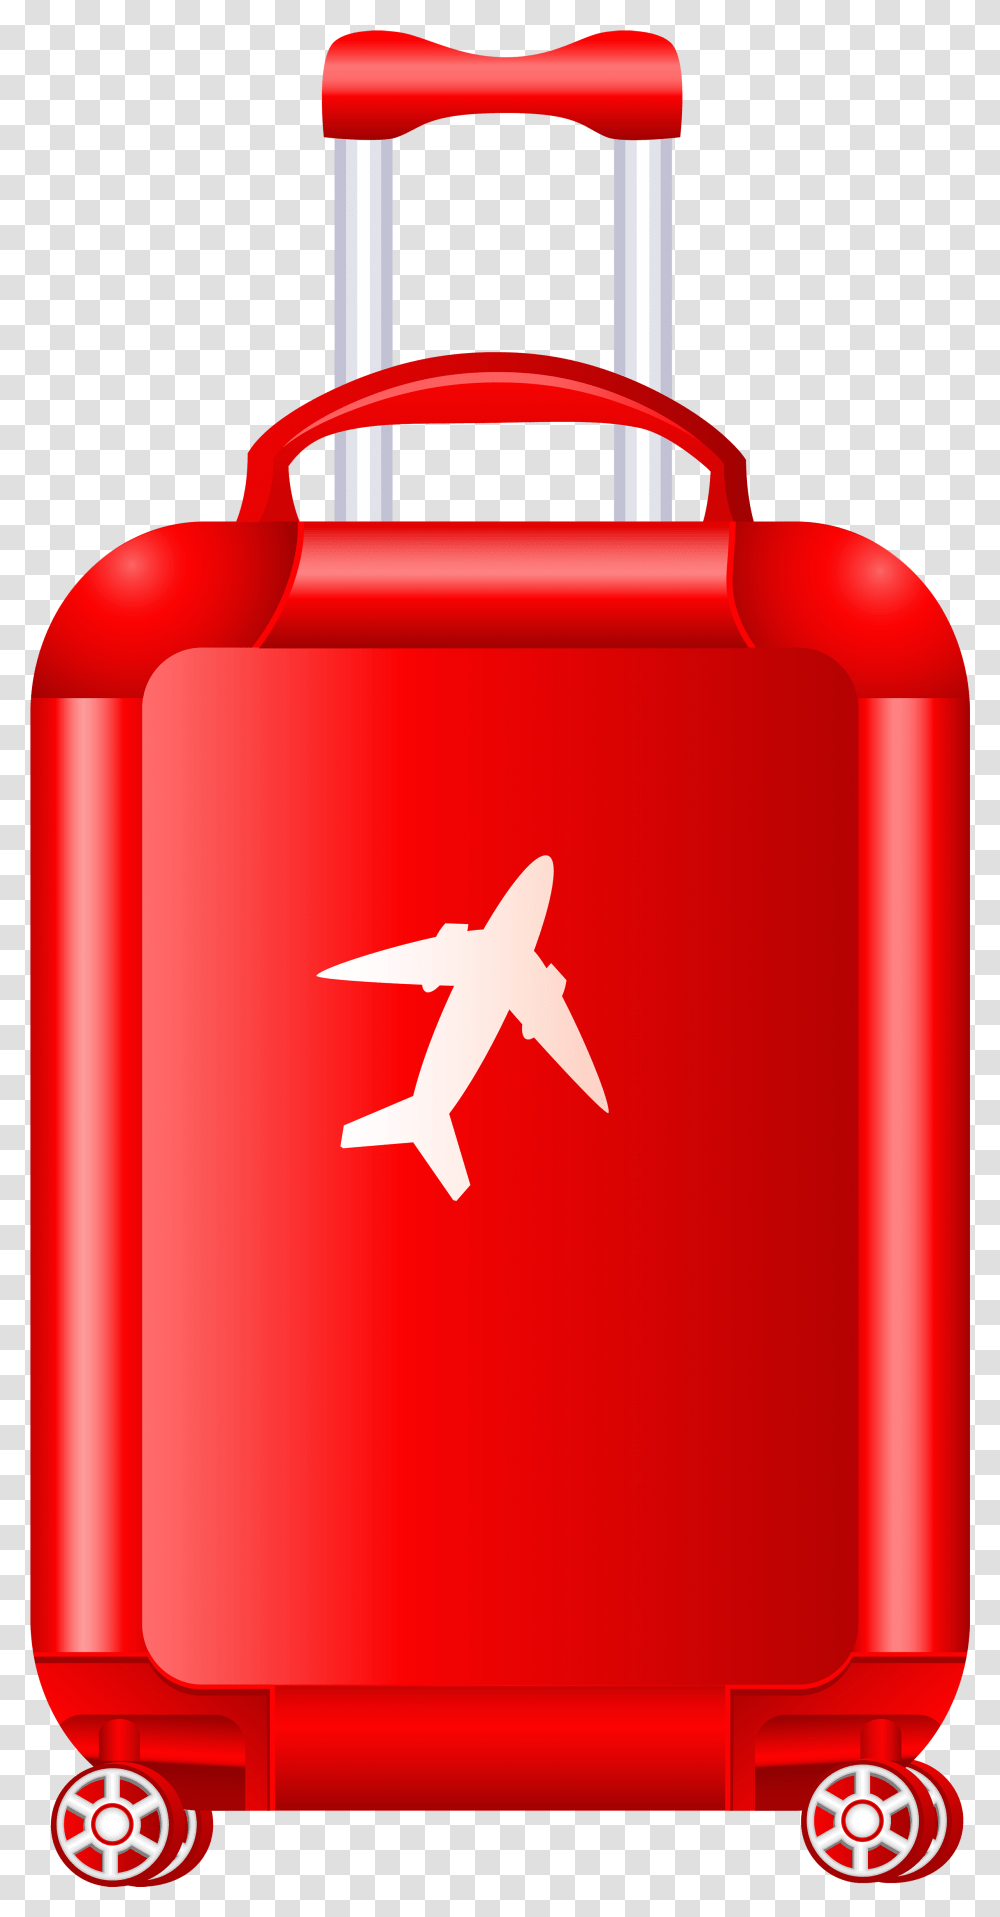 Red Trolley Suitcase Clipart Image Travel Background Suitcase Clipart, Gas Pump, Machine, Star Symbol Transparent Png